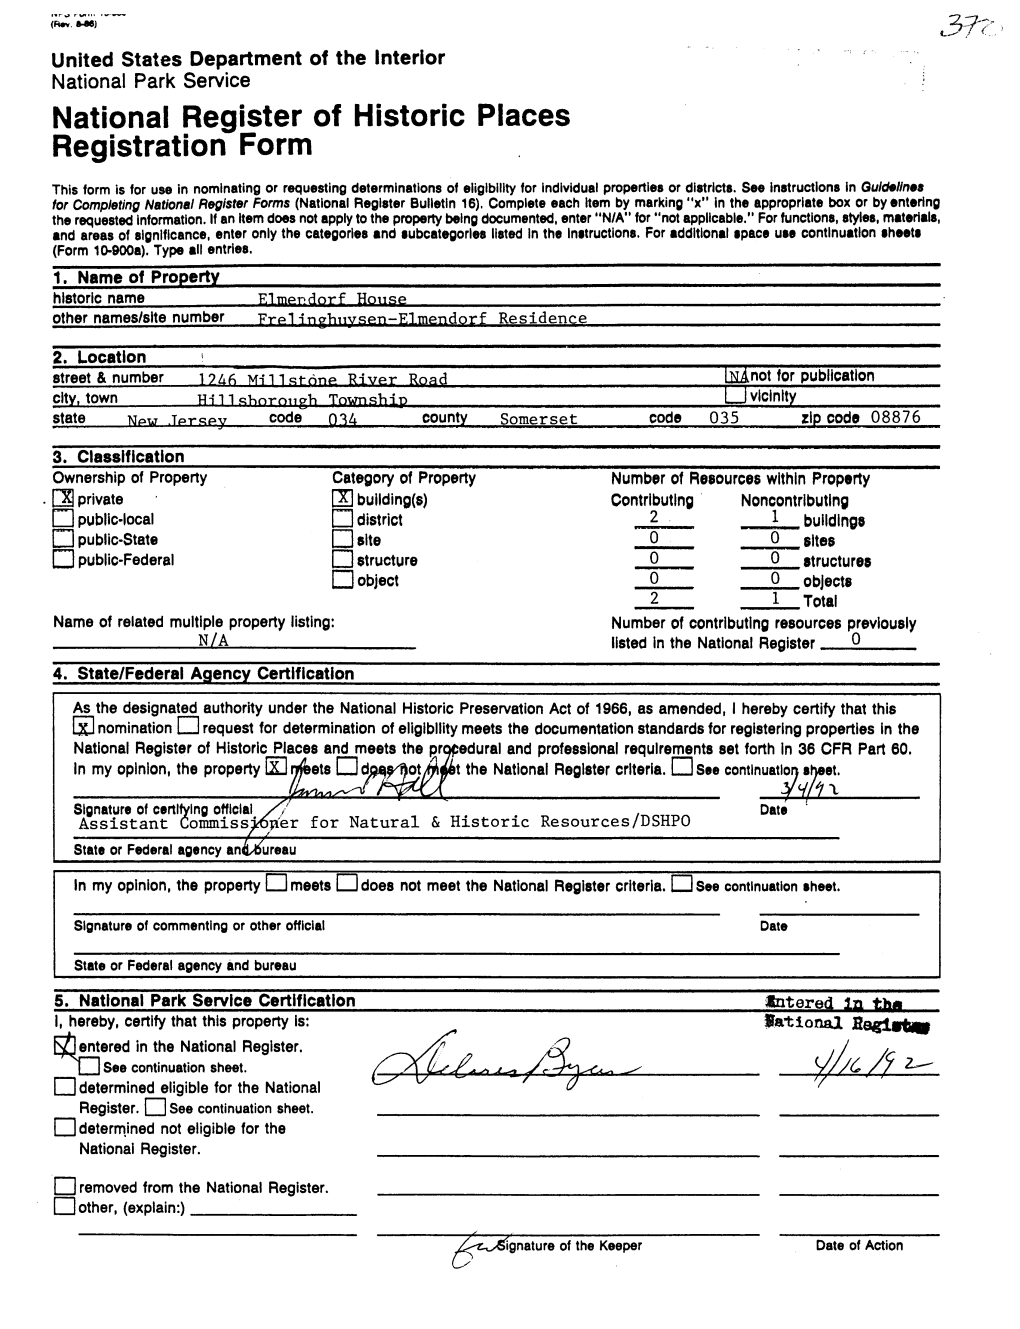 National Register of Historic Places Continuation Sheet